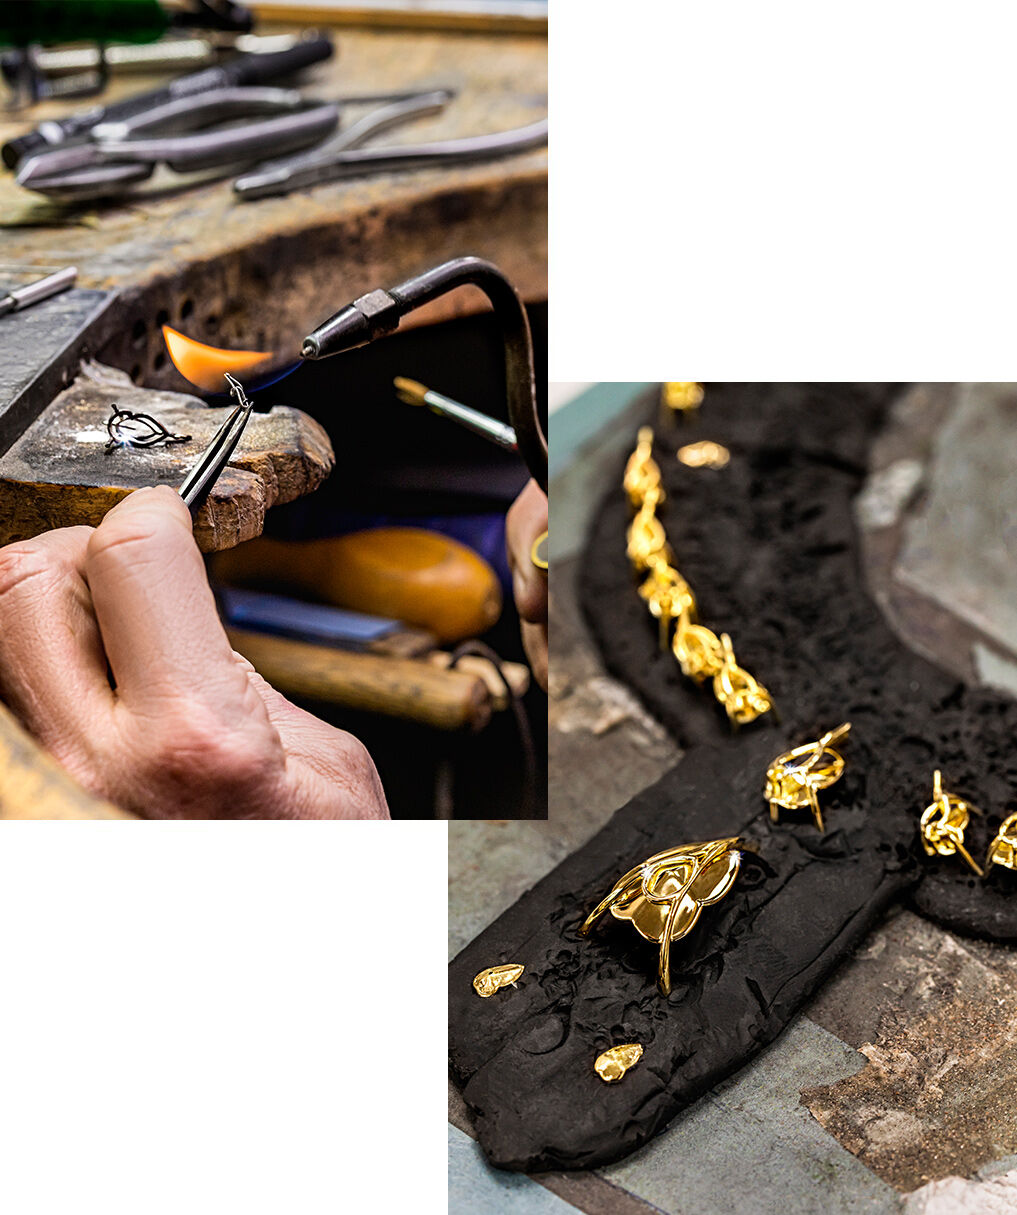 Images of Graff craftsman making high jewellery yellow and diamond necklace